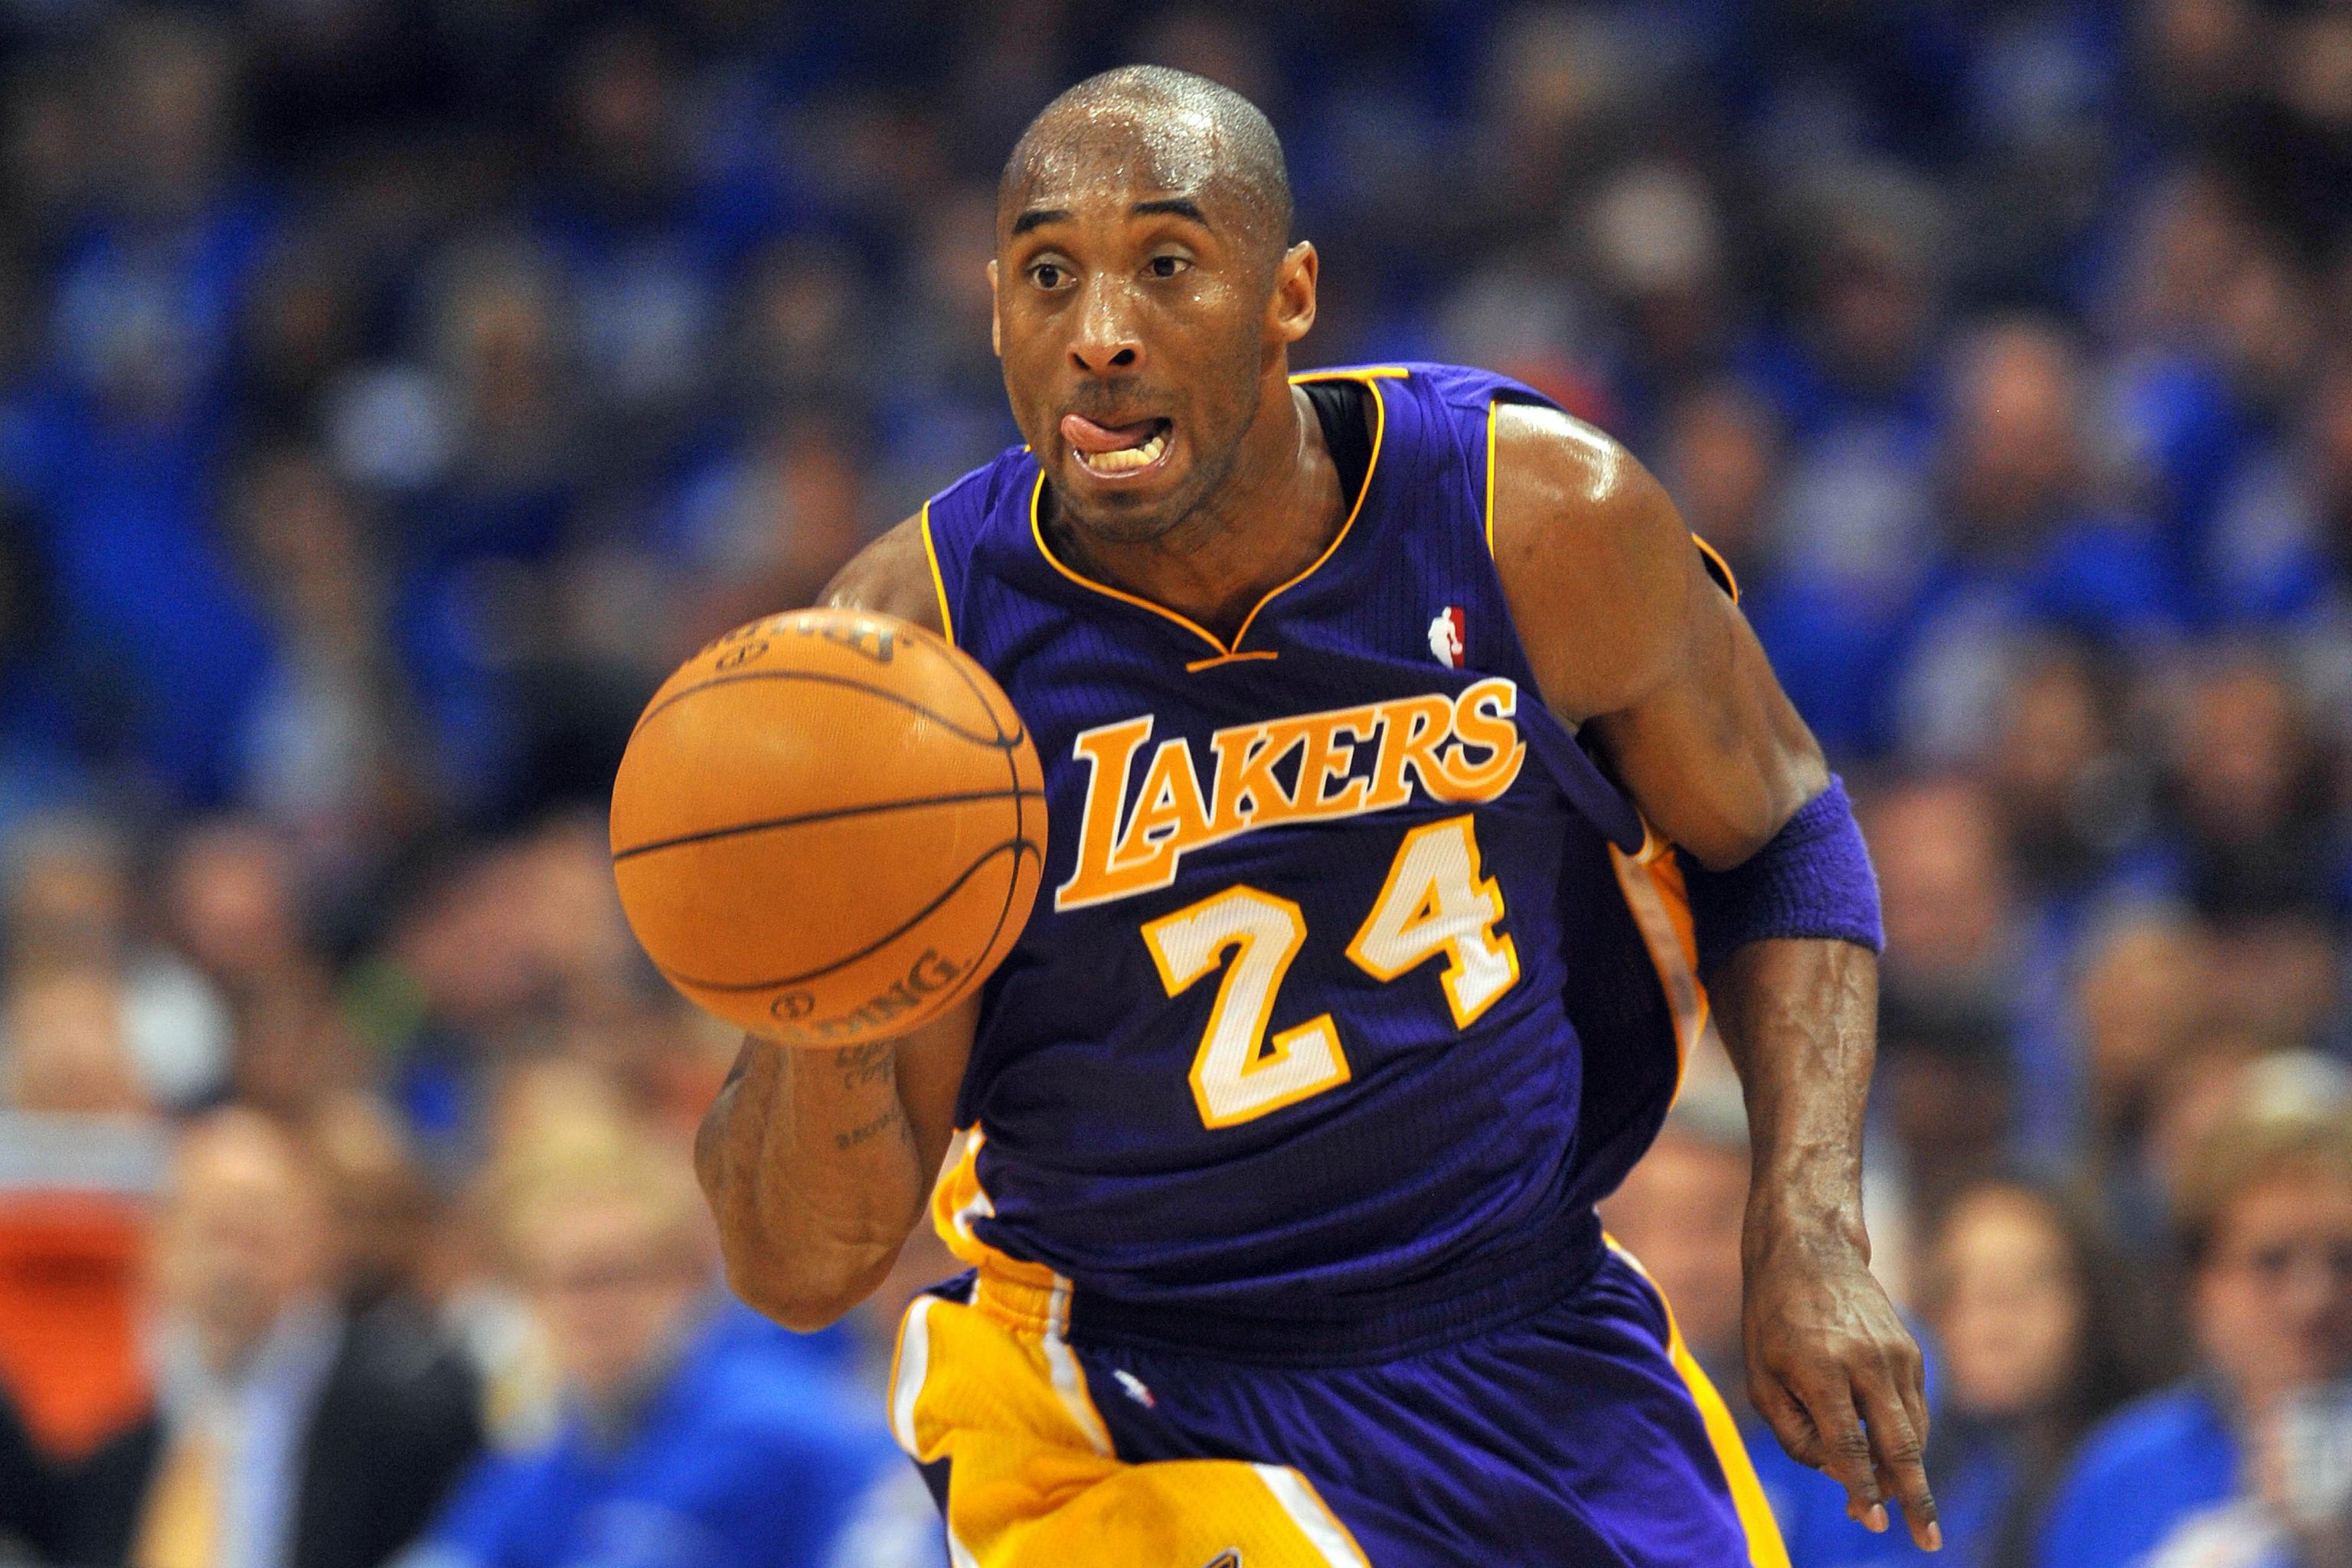 Kobe Bryant's Final All-Star Game Jersey Sold for $100K, Sets NBA